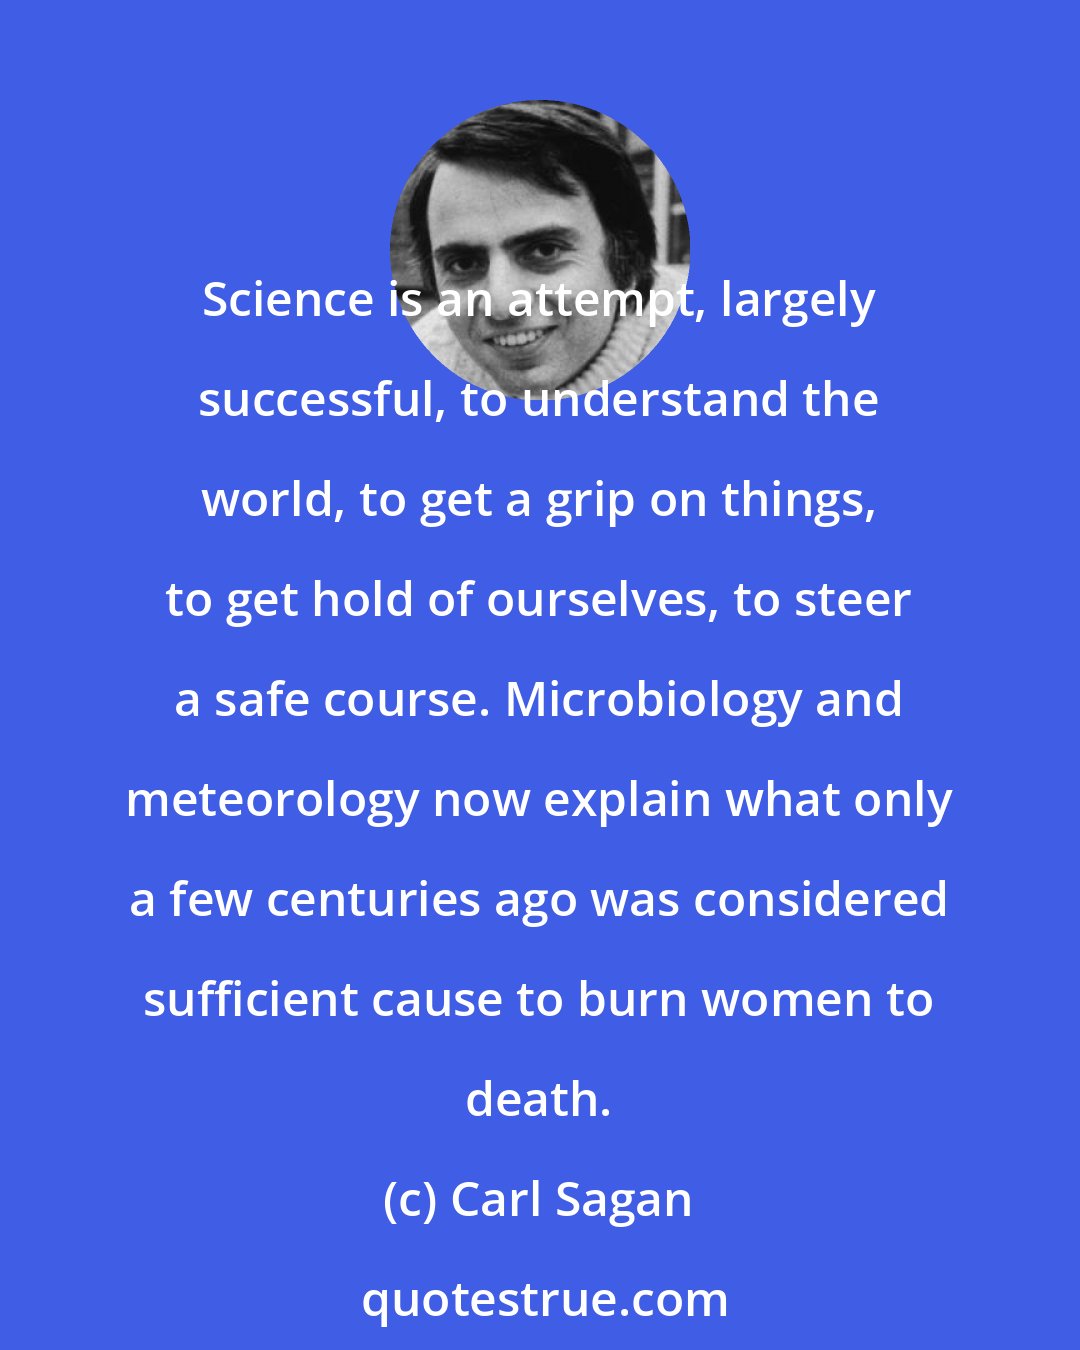 Carl Sagan: Science is an attempt, largely successful, to understand the world, to get a grip on things, to get hold of ourselves, to steer a safe course. Microbiology and meteorology now explain what only a few centuries ago was considered sufficient cause to burn women to death.